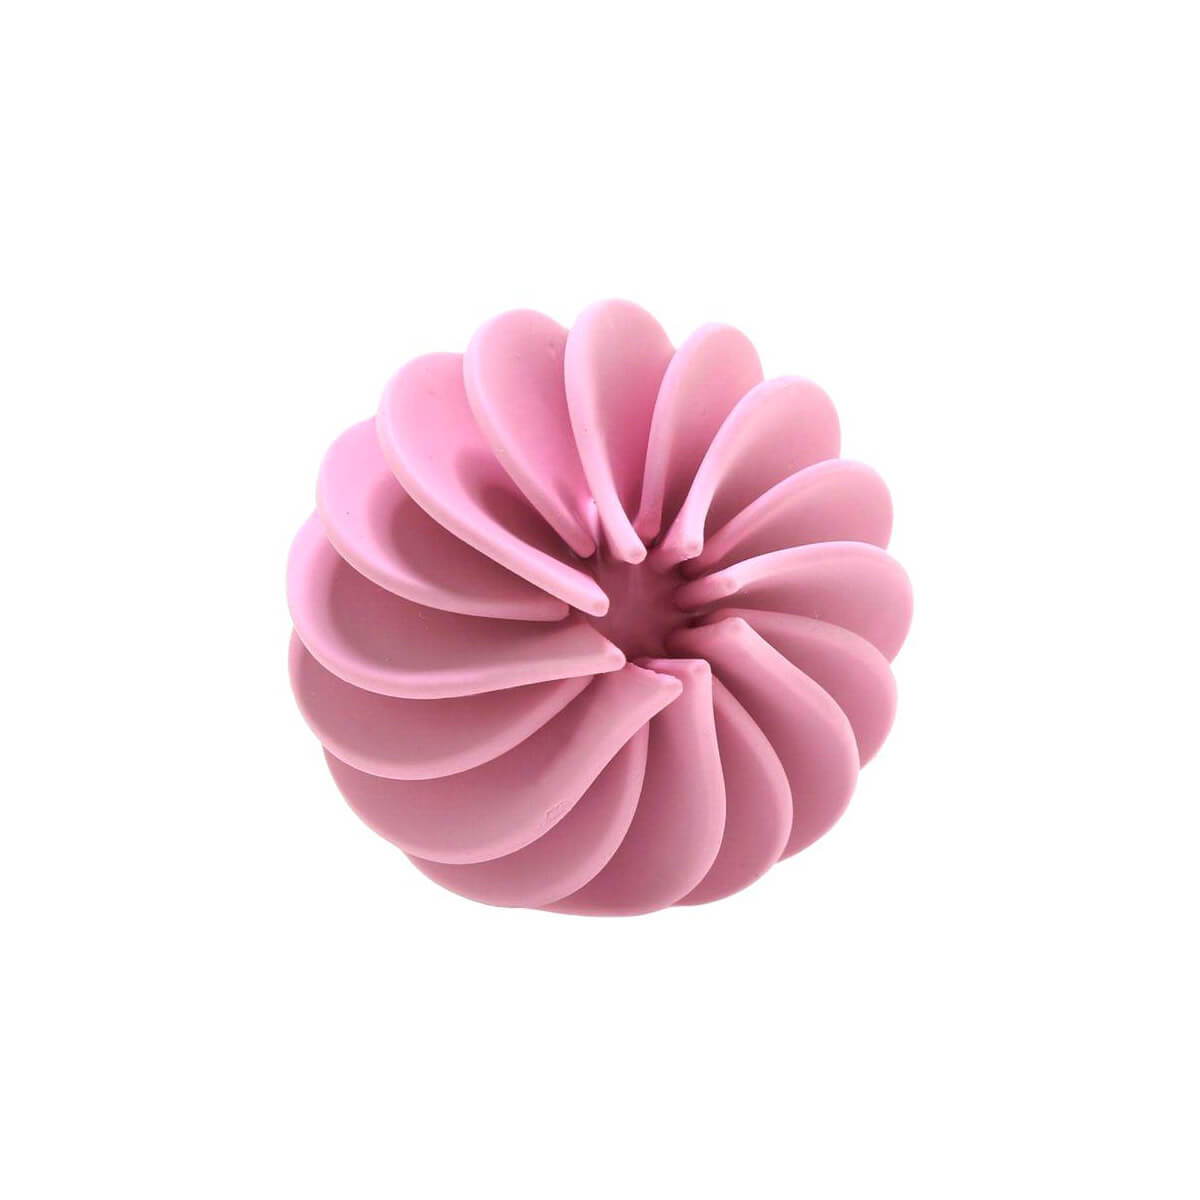 Top view of pink silicone spinning head for clitoral stimulation Nudie Co